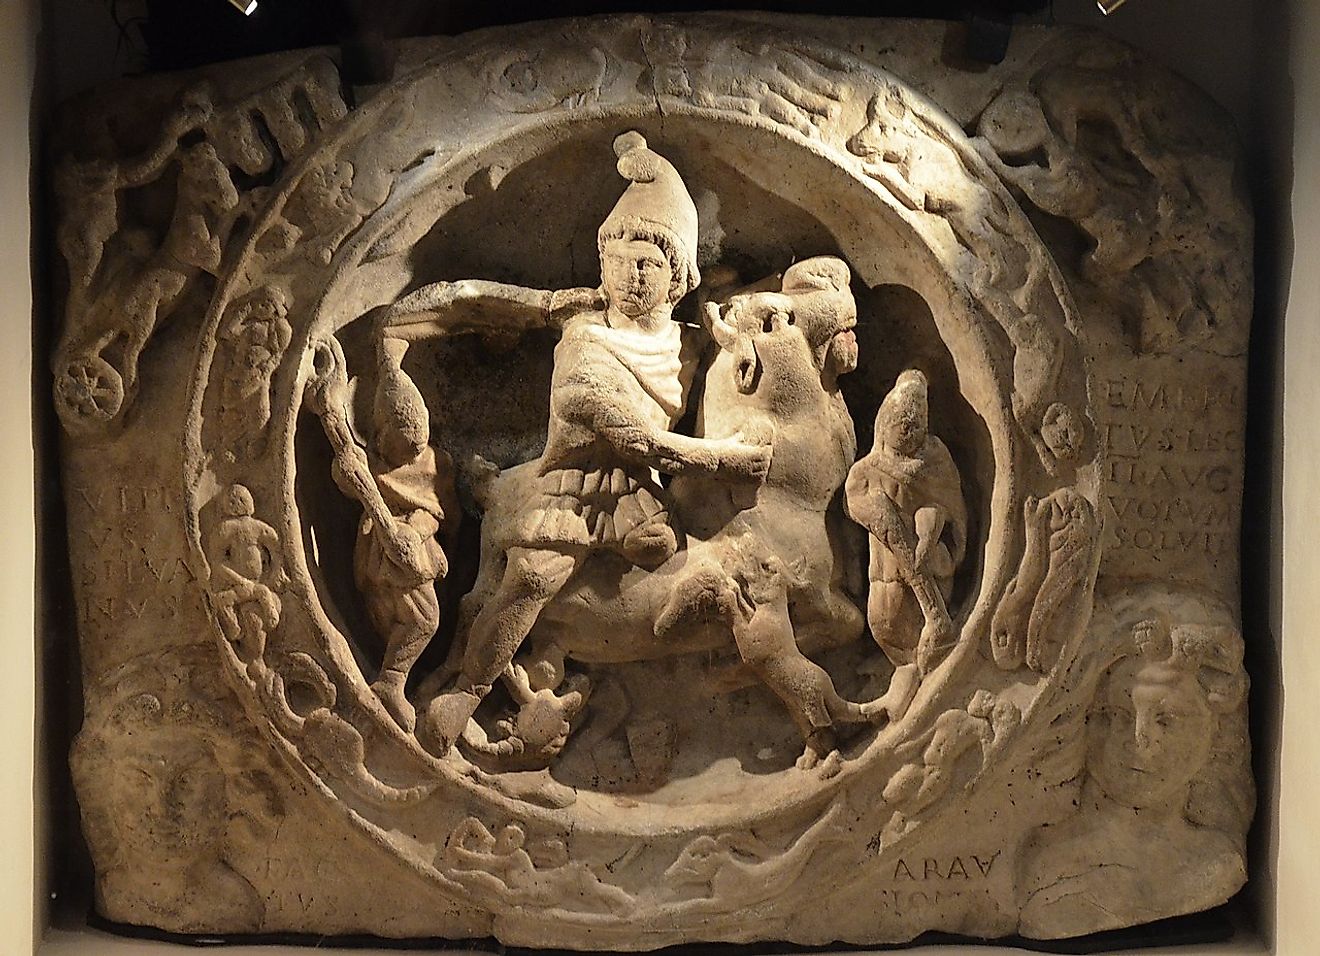 White marble relief depicting Mithras slaying the bull, found at the Walbrook site and on display at the Museum of London. Image credit: Carole Raddato from FRANKFURT, Germany/Wikimedia.org